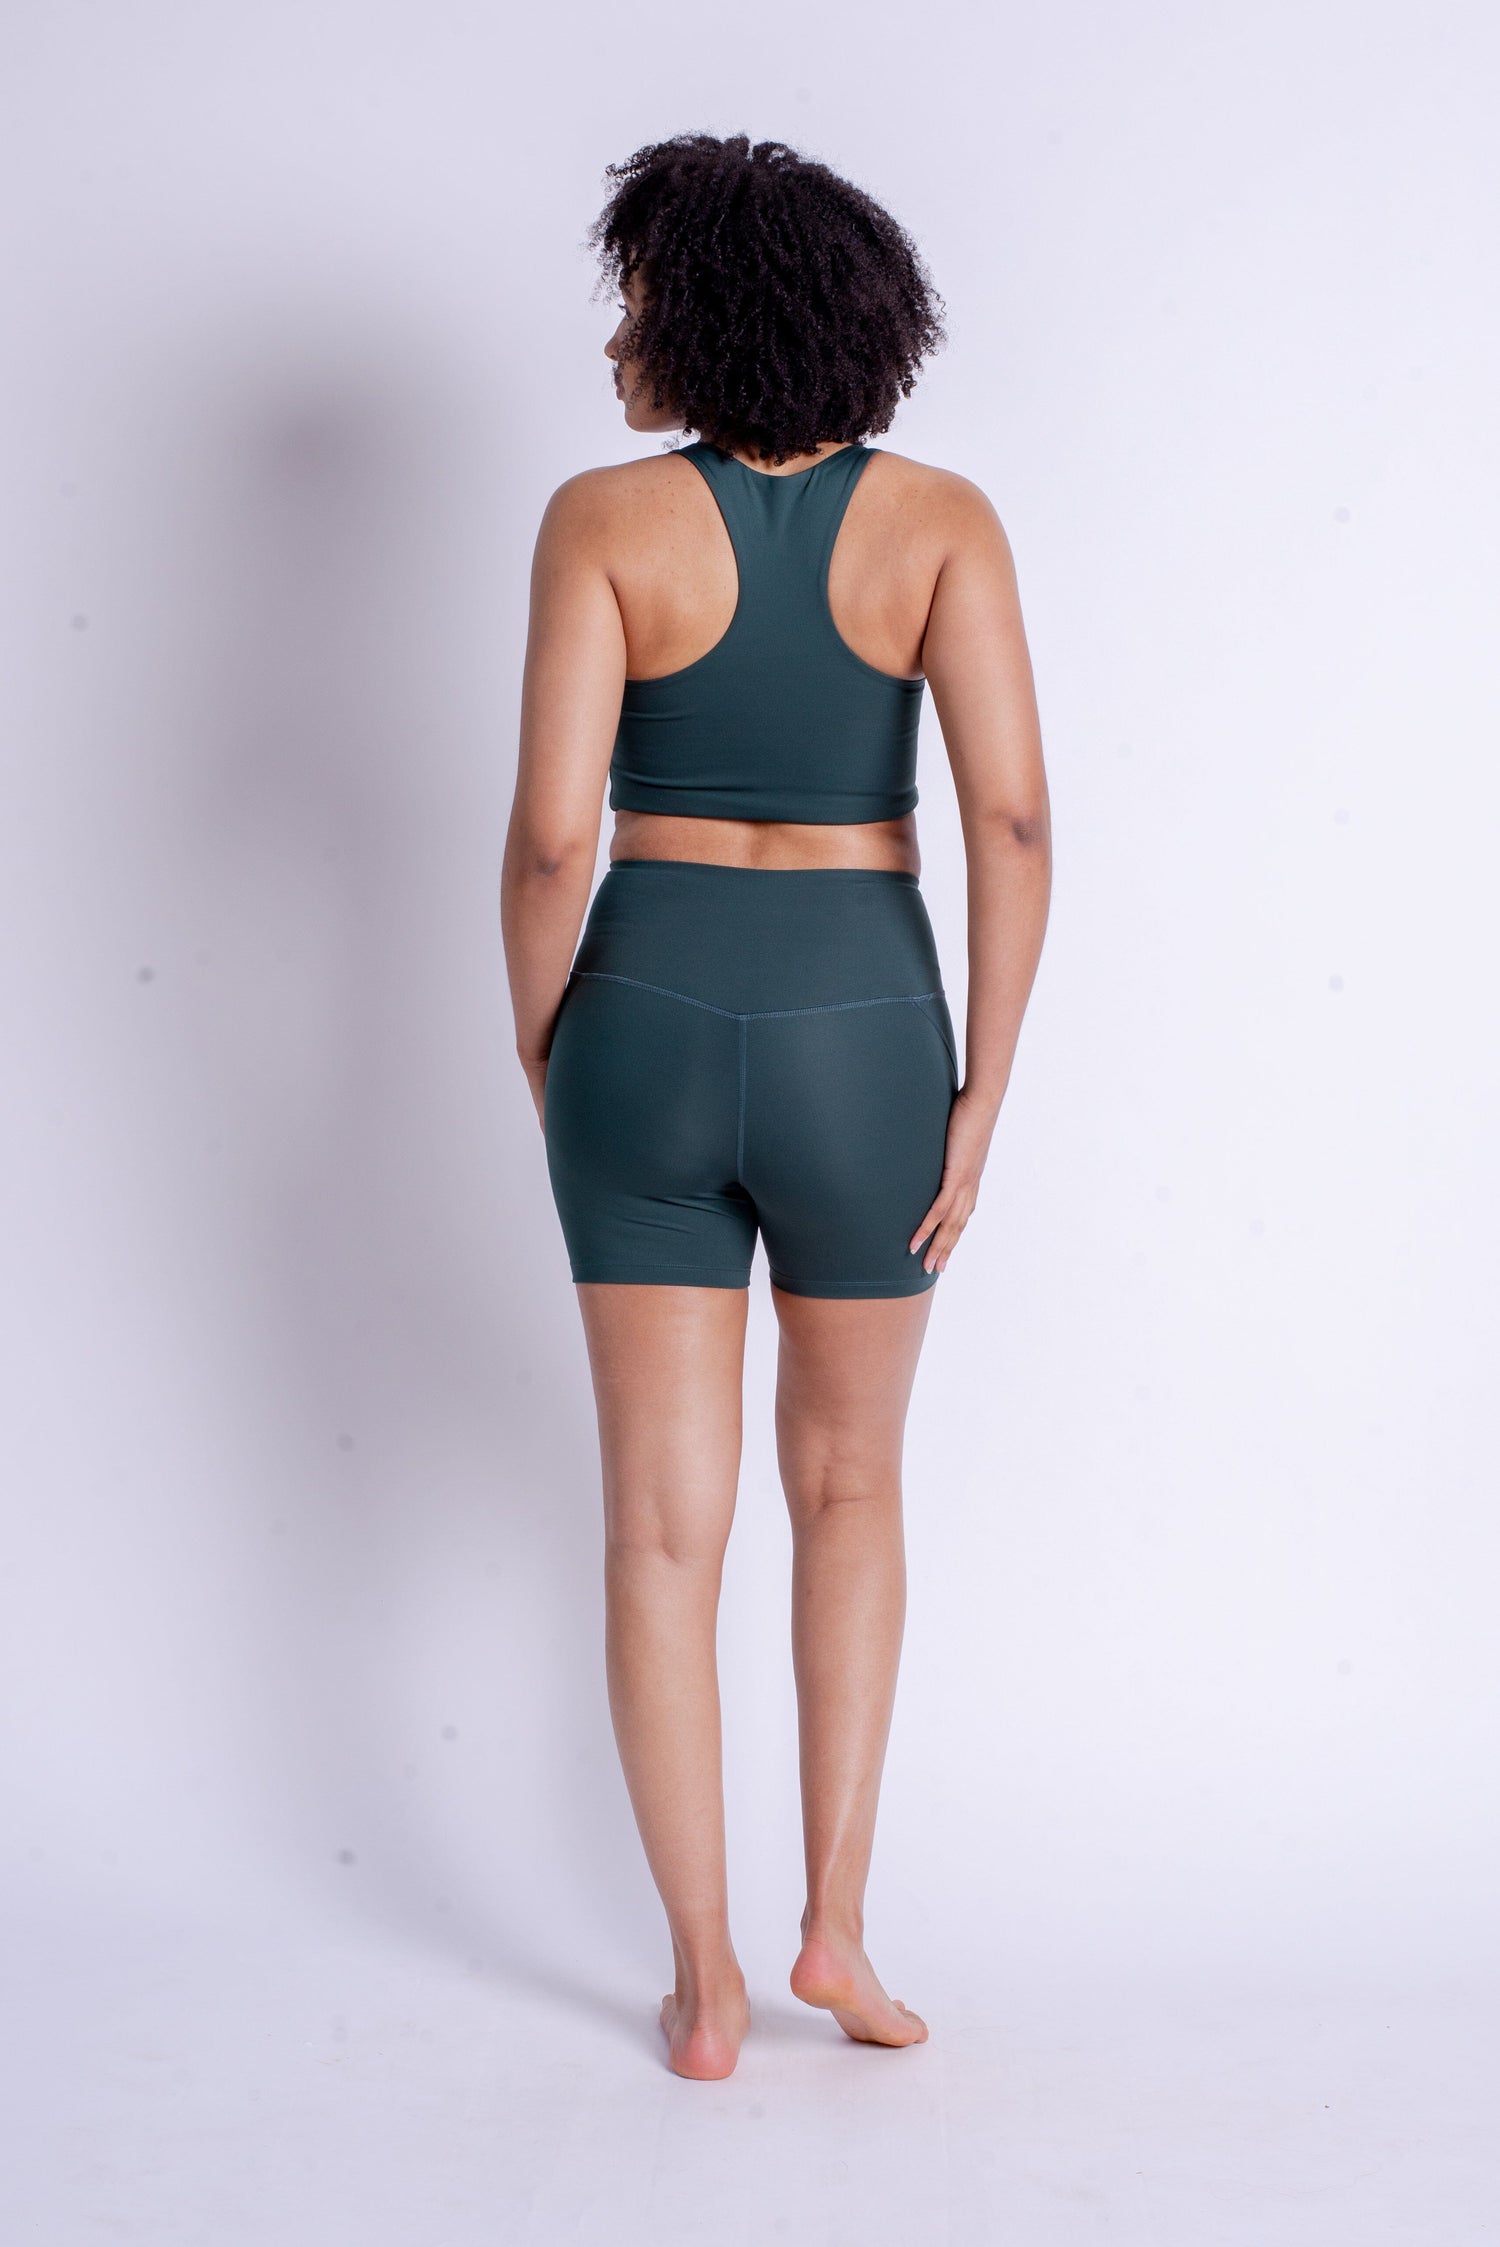 Girlfriend Collective - Run Shorts High-Rise - Made from Recycled Plastic Bottles - Weekendbee - sustainable sportswear